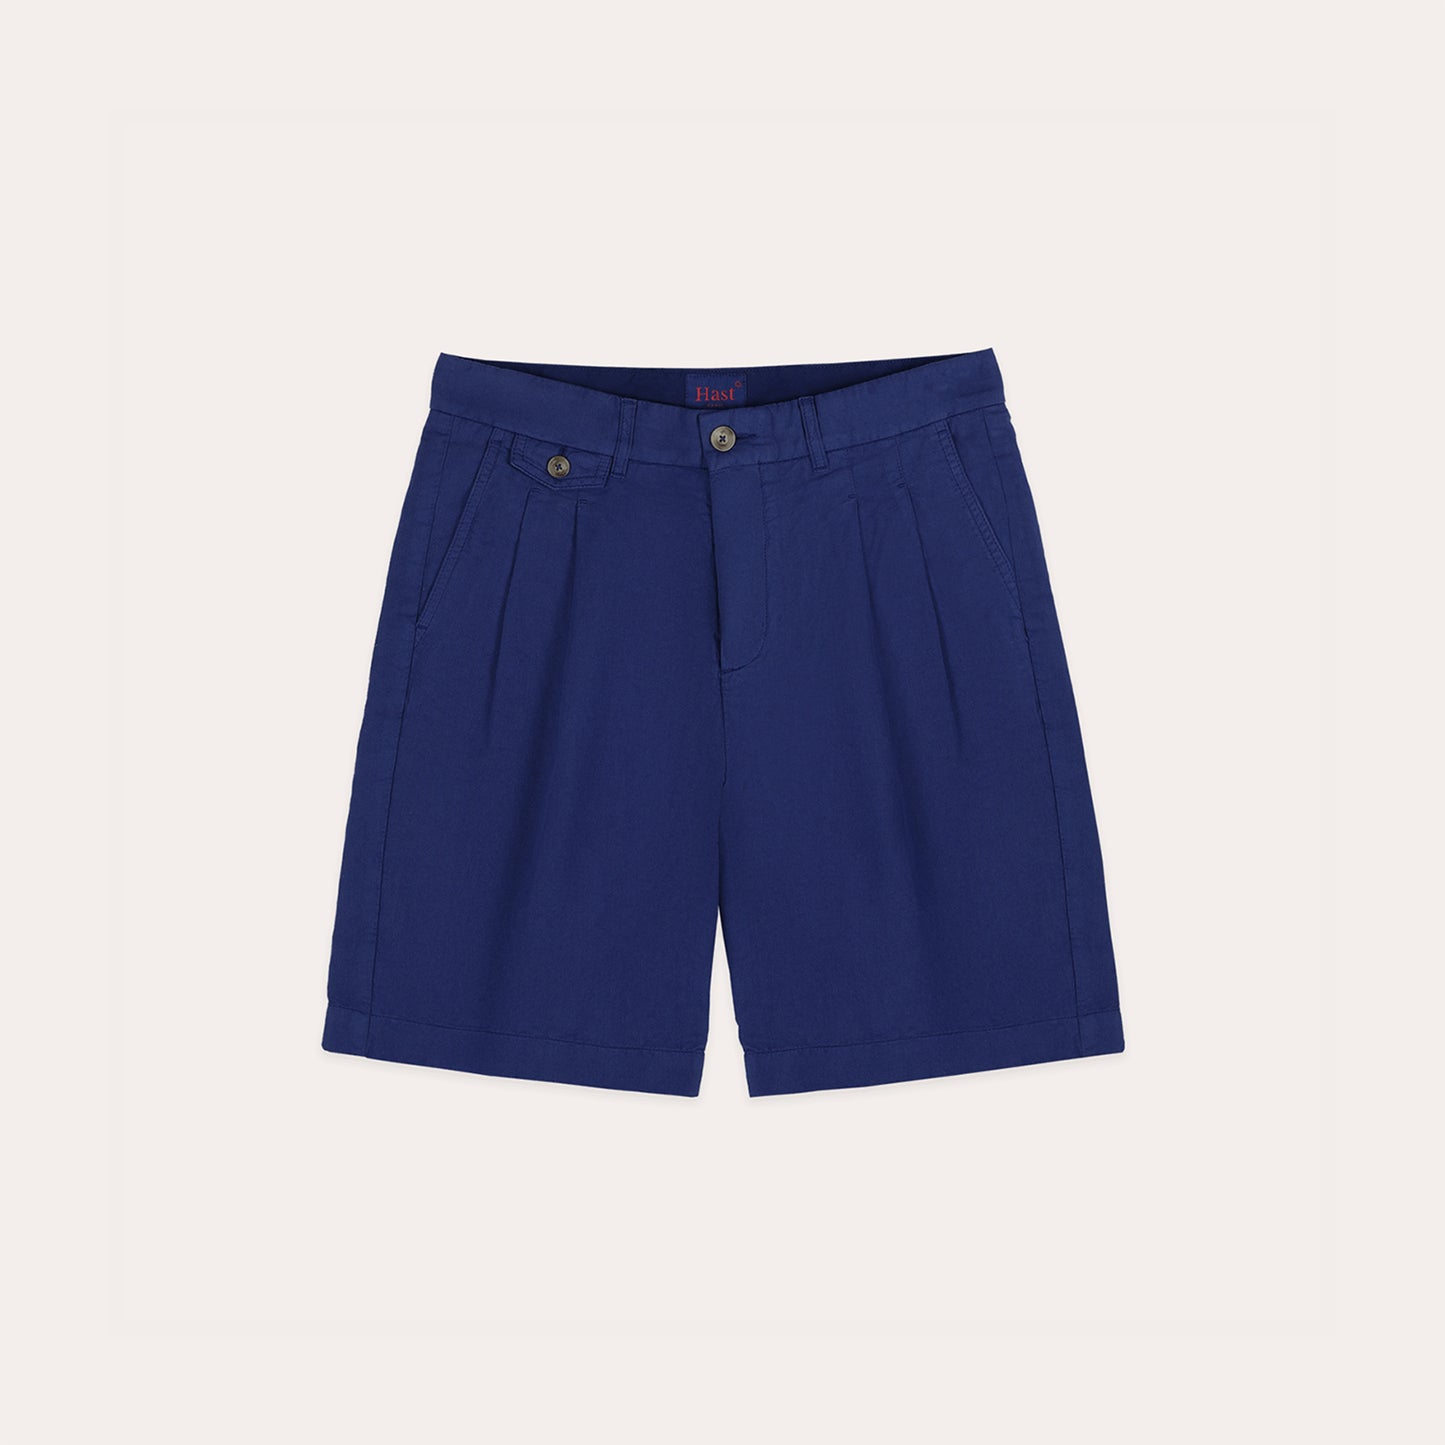 Indigo cotton and linen double-pleated shorts